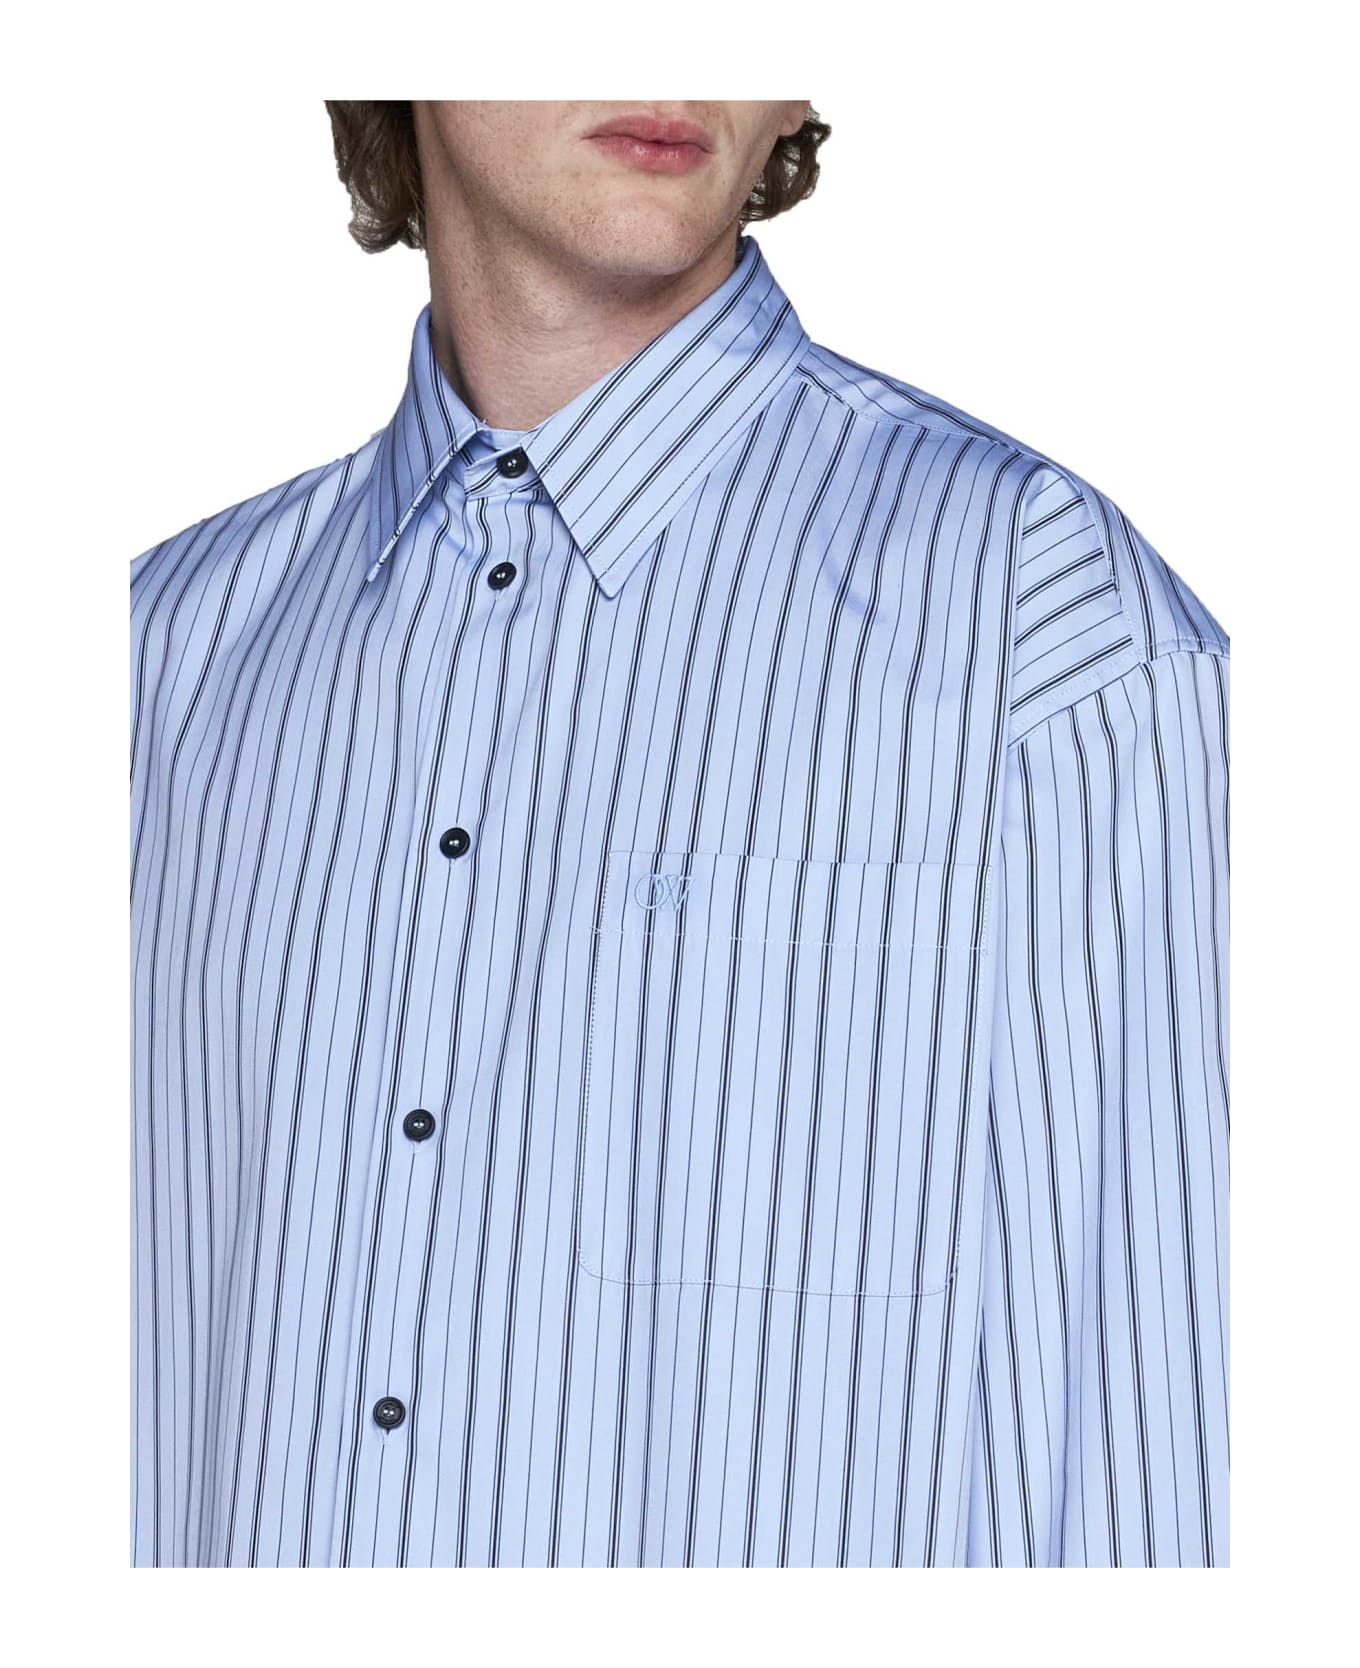 Off-White Embroidered Stripe Shirt - Placid blue